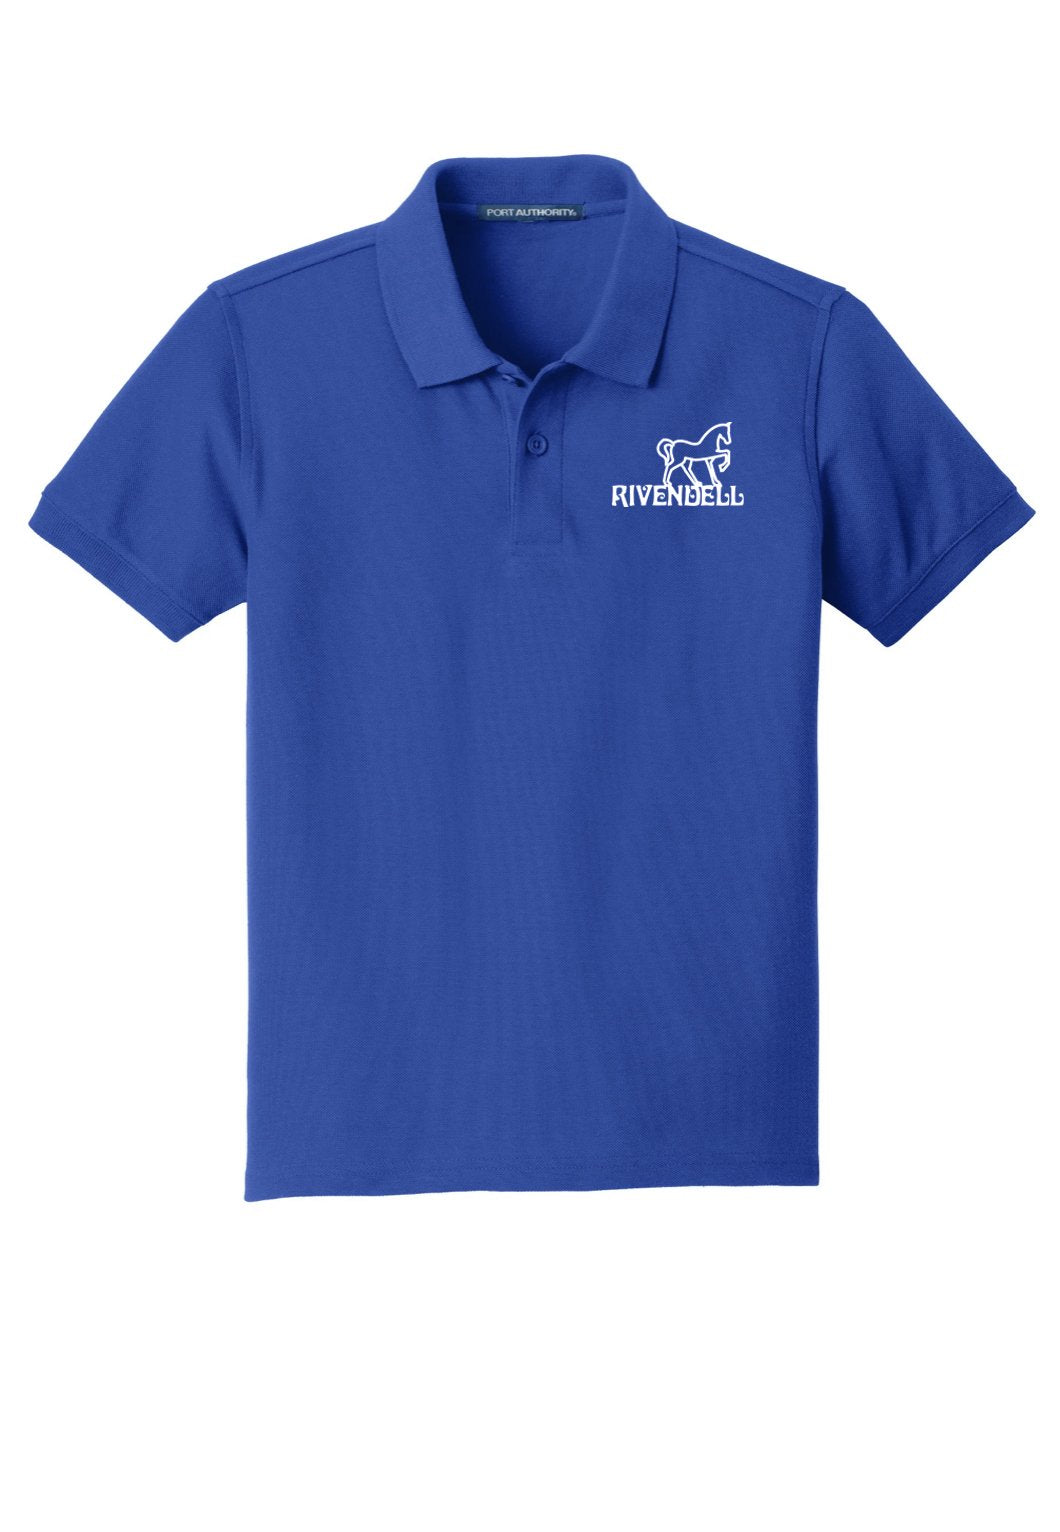 Rivendell Youth Classic Pique Polo